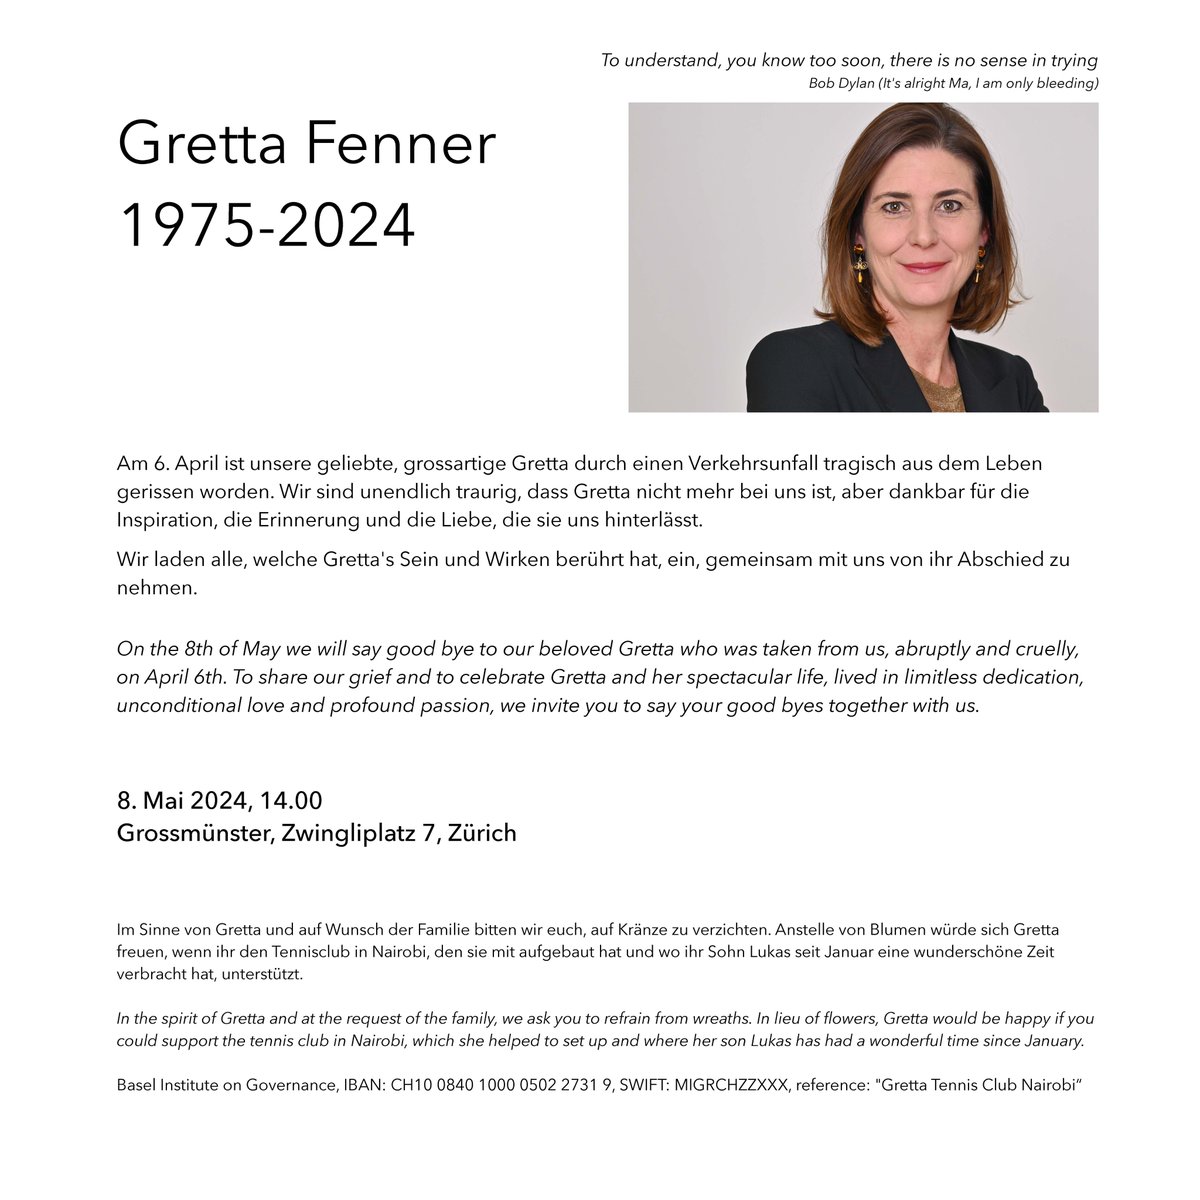 A memorial service for Gretta Fenner will be held on Wednesday, 8 May at the Grossmünster in Zurich. Gretta's family invites all who share in their grief at her passing to come and say our goodbyes together. Live streaming will be available for those unable to attend in person.…